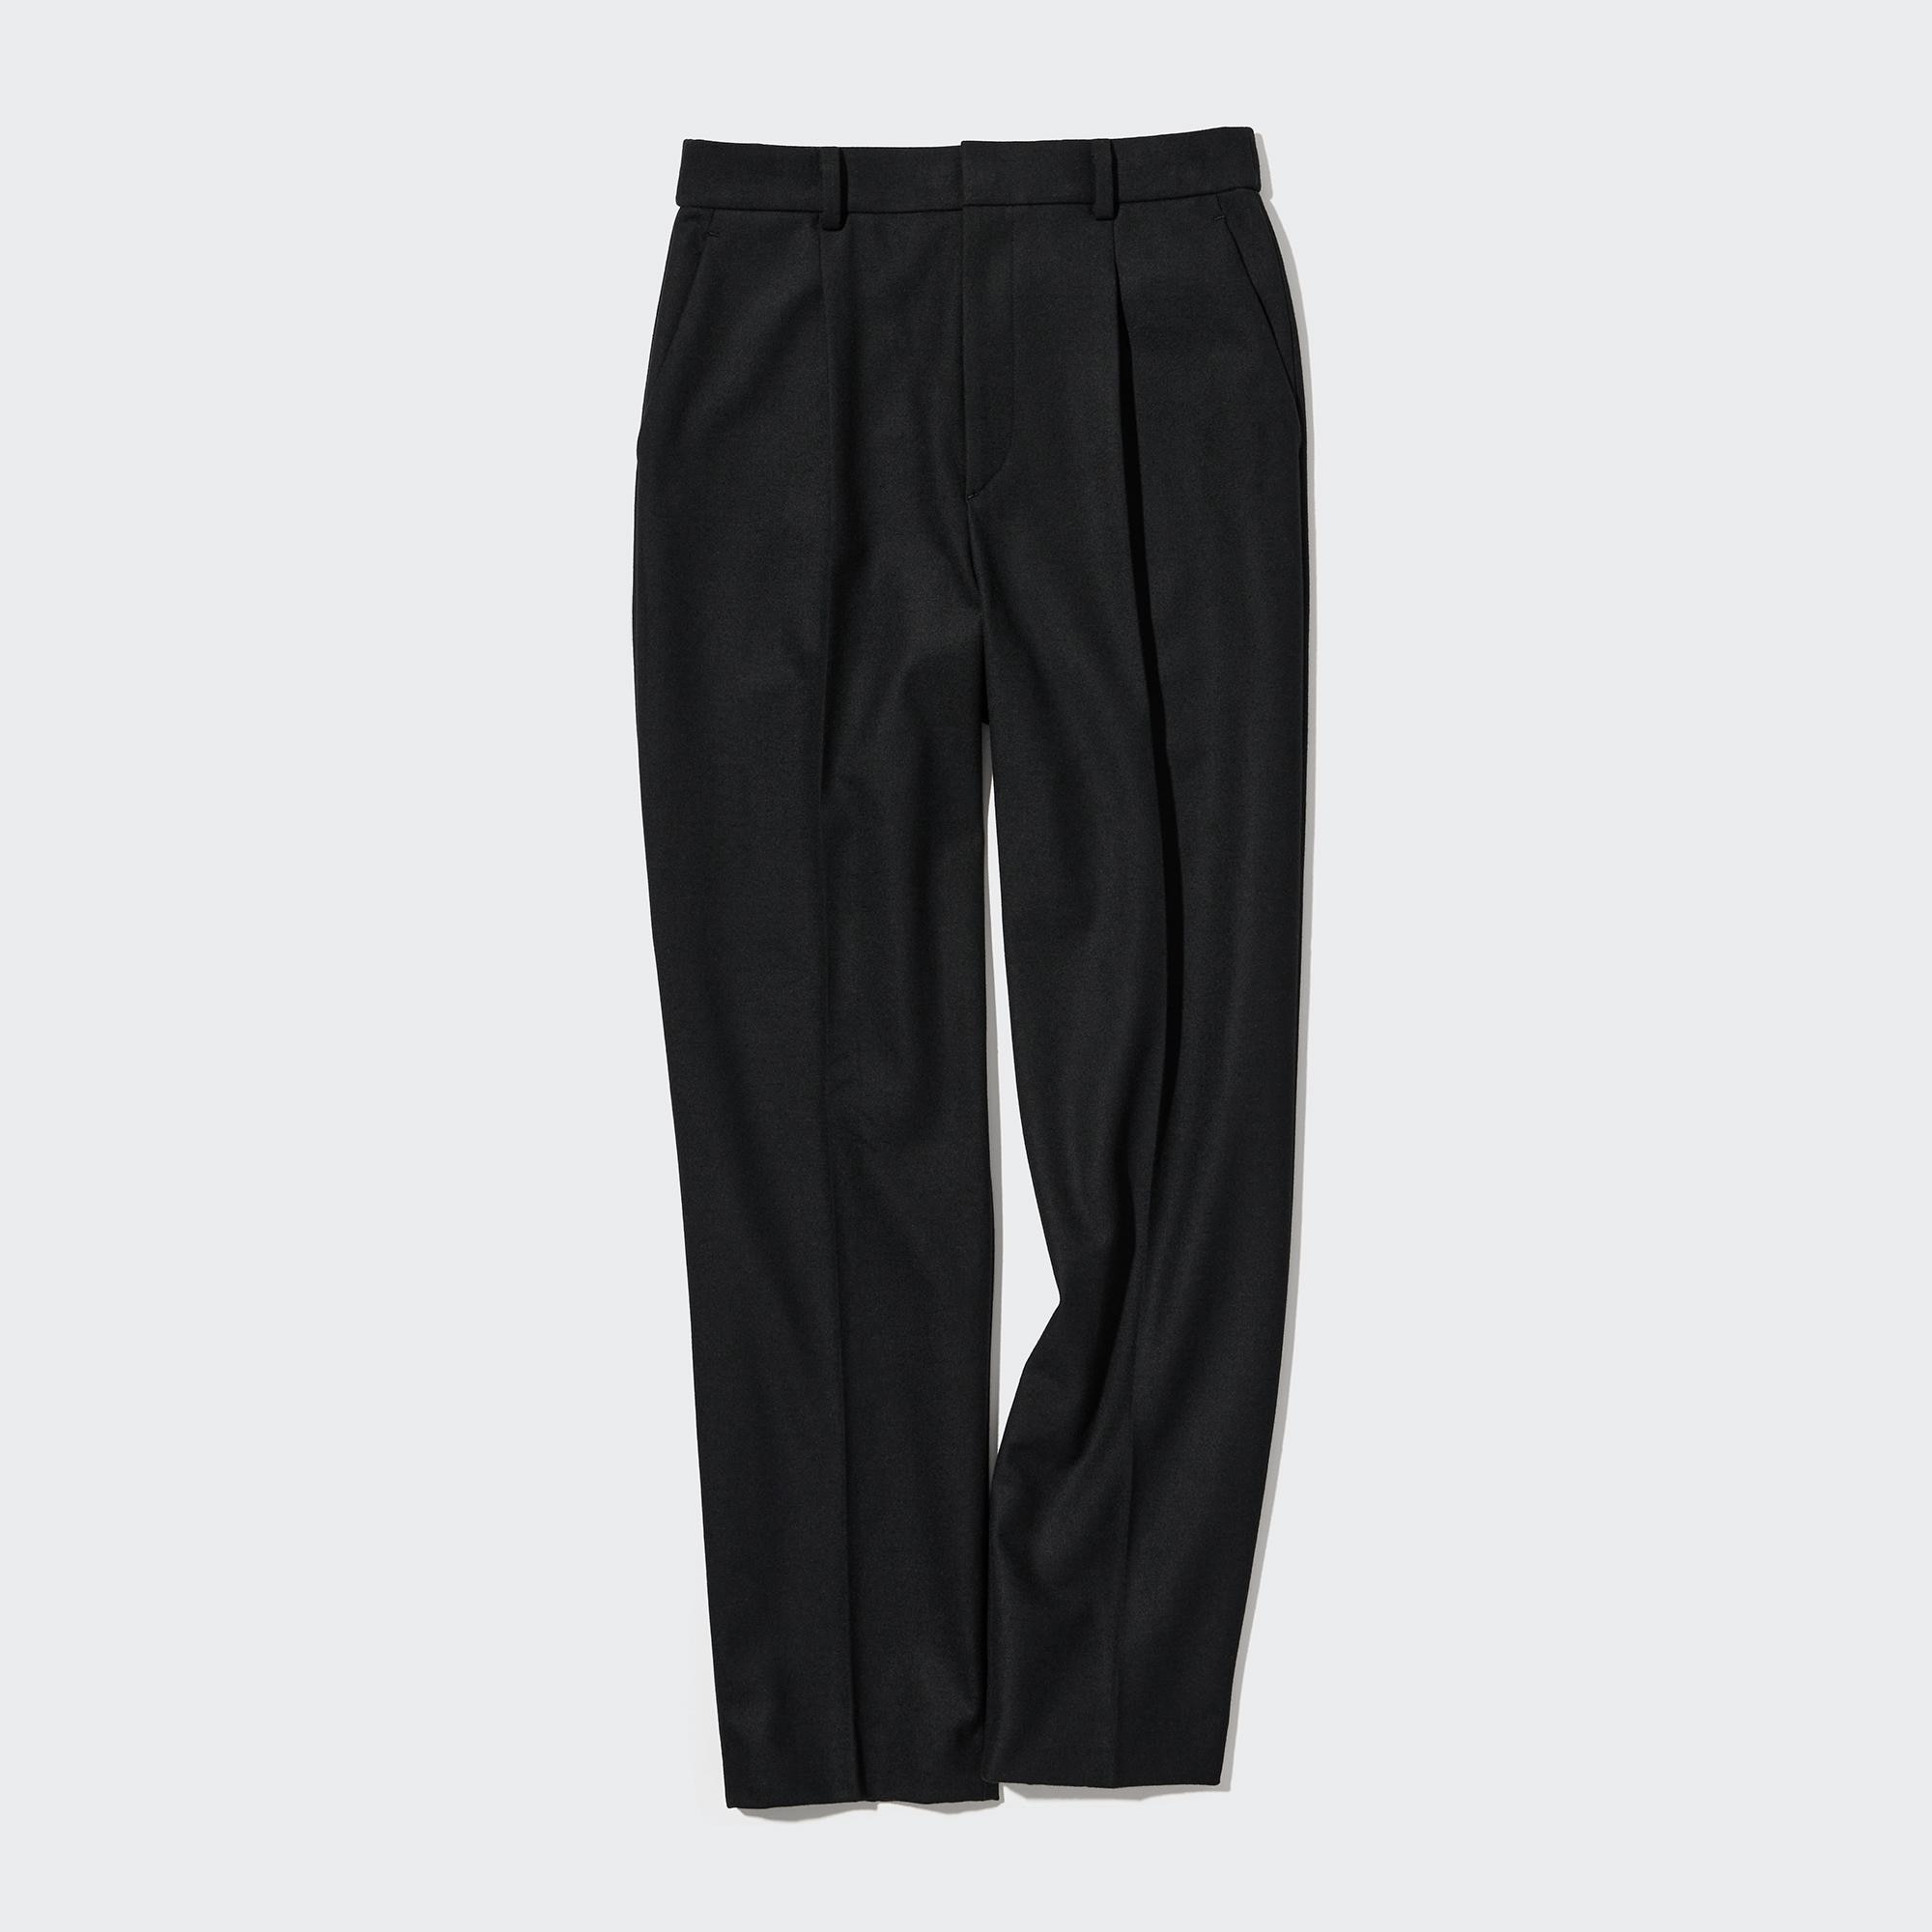 UNIQLO HEATTECH Pleated Tapered Pants | StyleHint